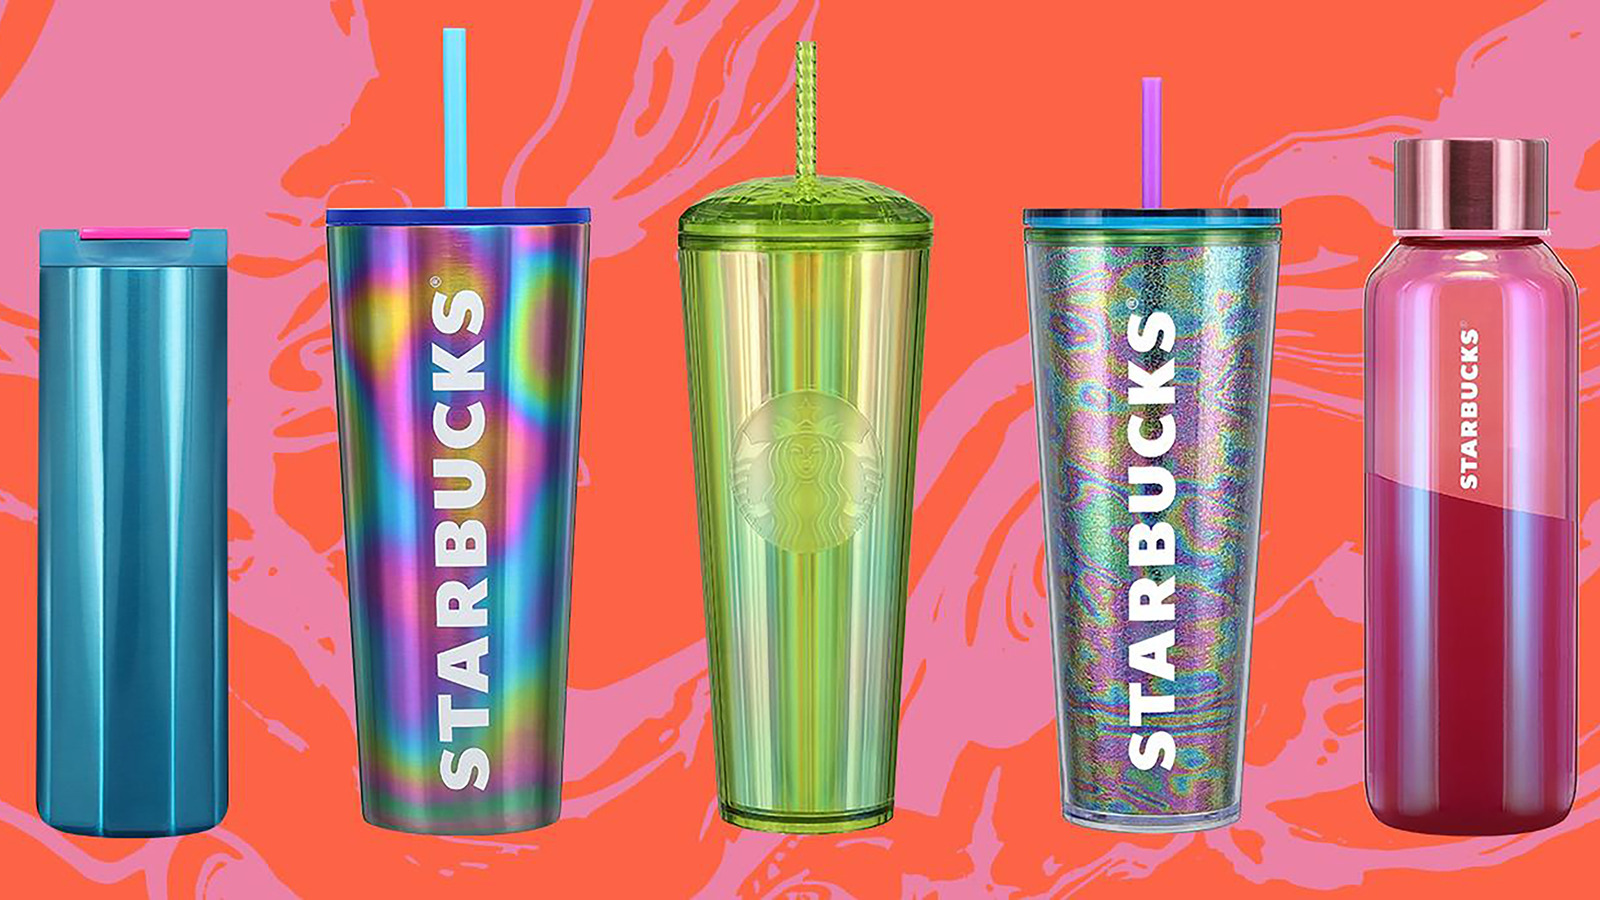 New and used Starbucks Tumblers for sale